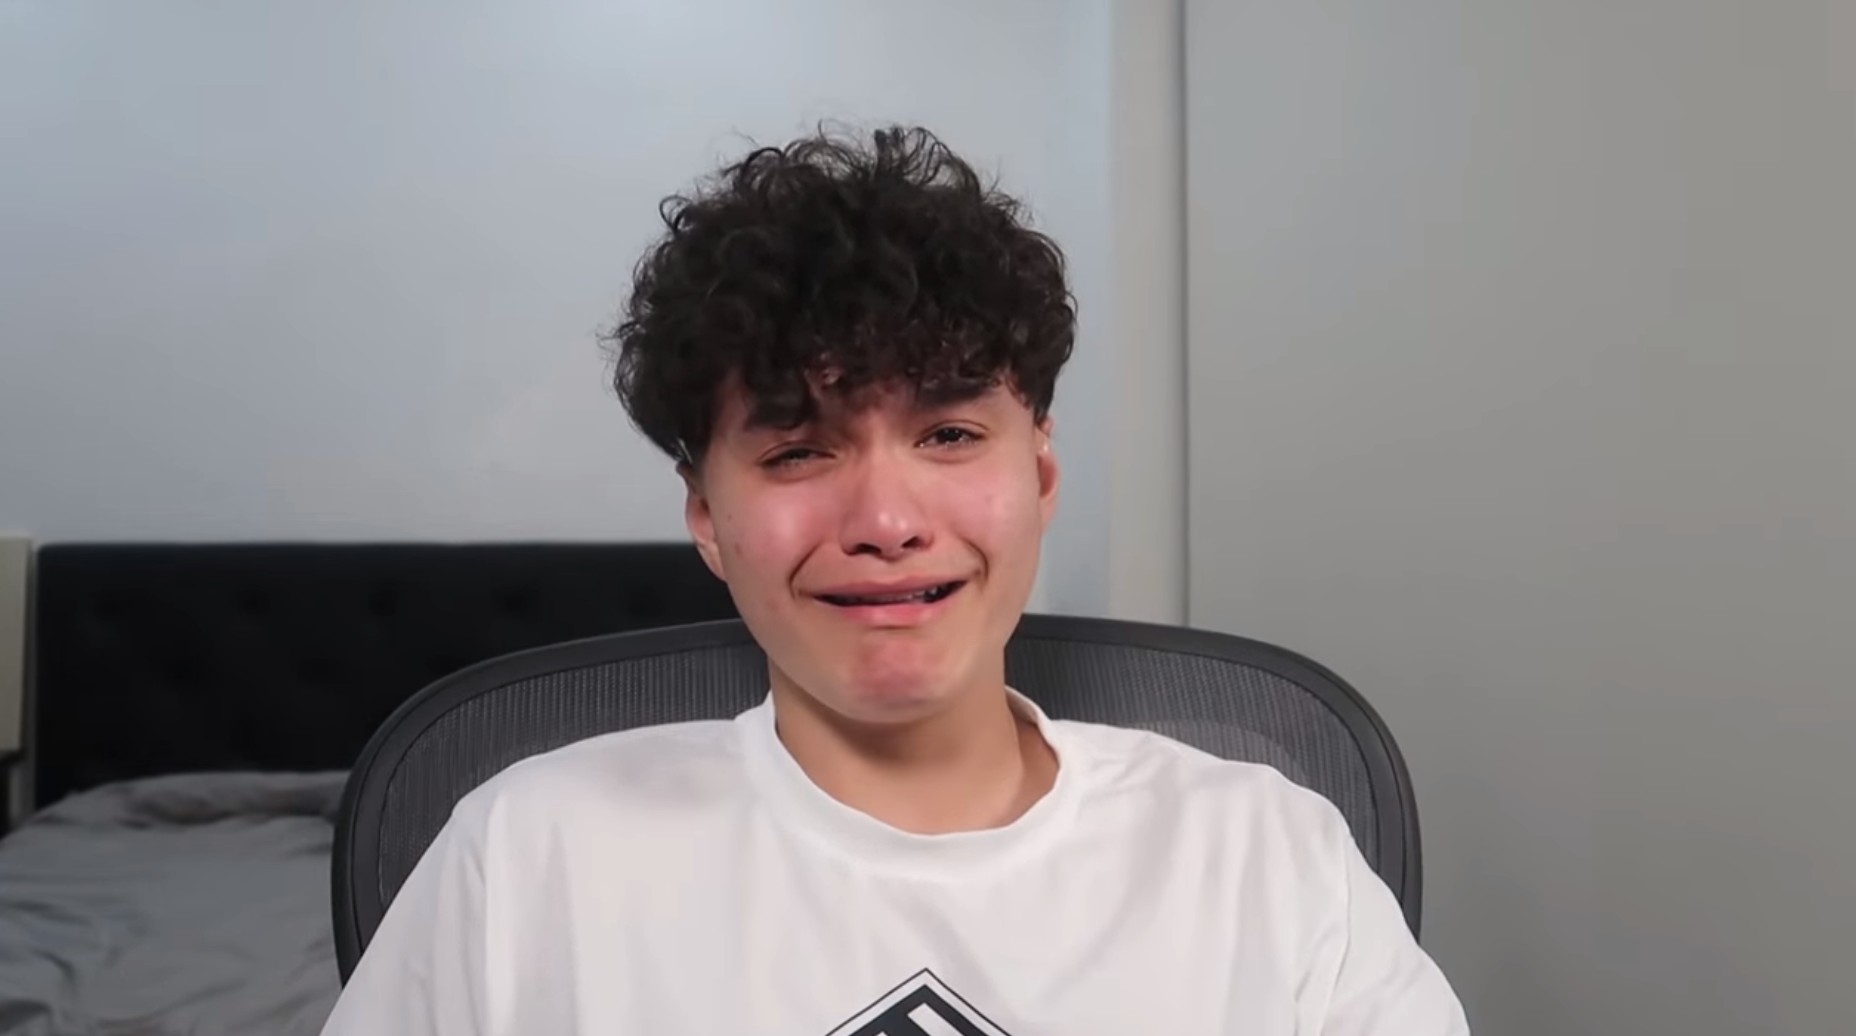 Fortnite Crying Guy Who Is Jarvis And Why Is He Crying About Fortnite